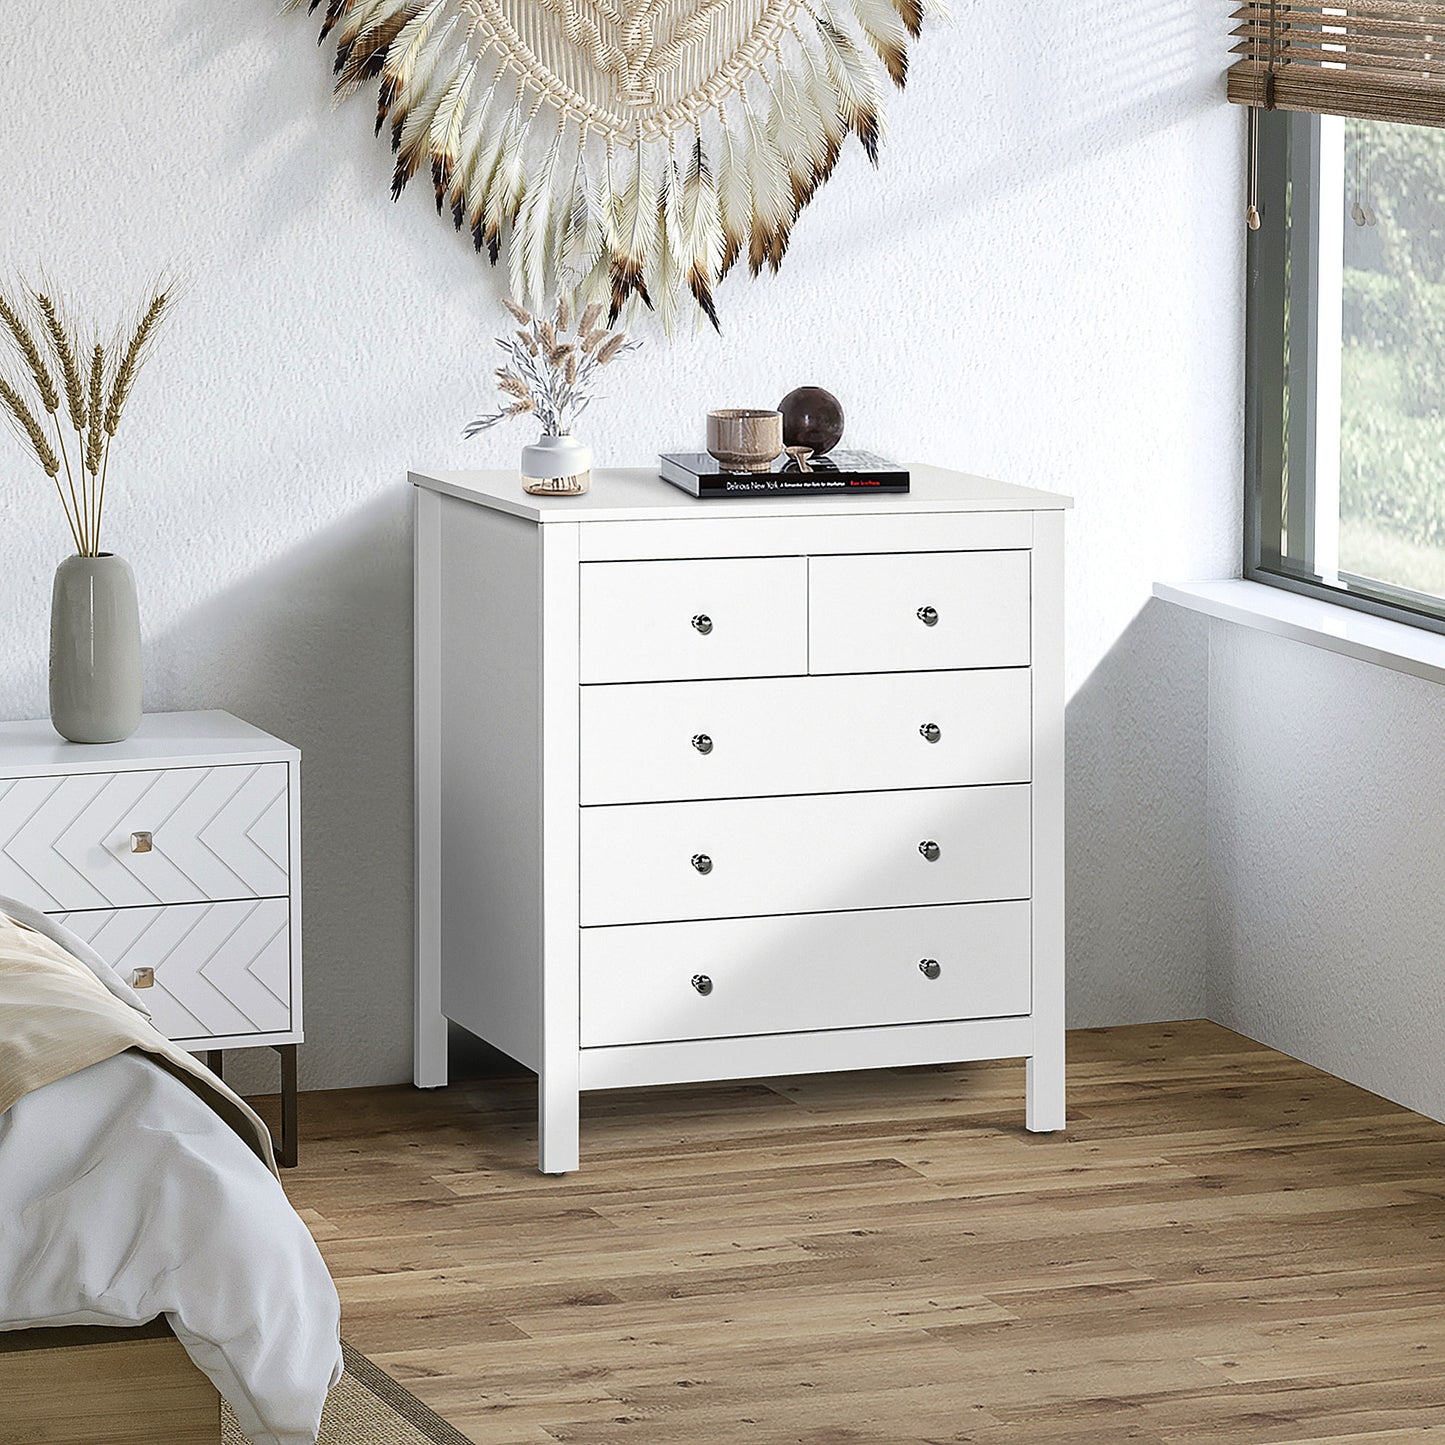 HOMCOM Modern Chest of Drawers, 5 Drawer Storage Cabinet with Metal Handles and Runners for Bedroom, White